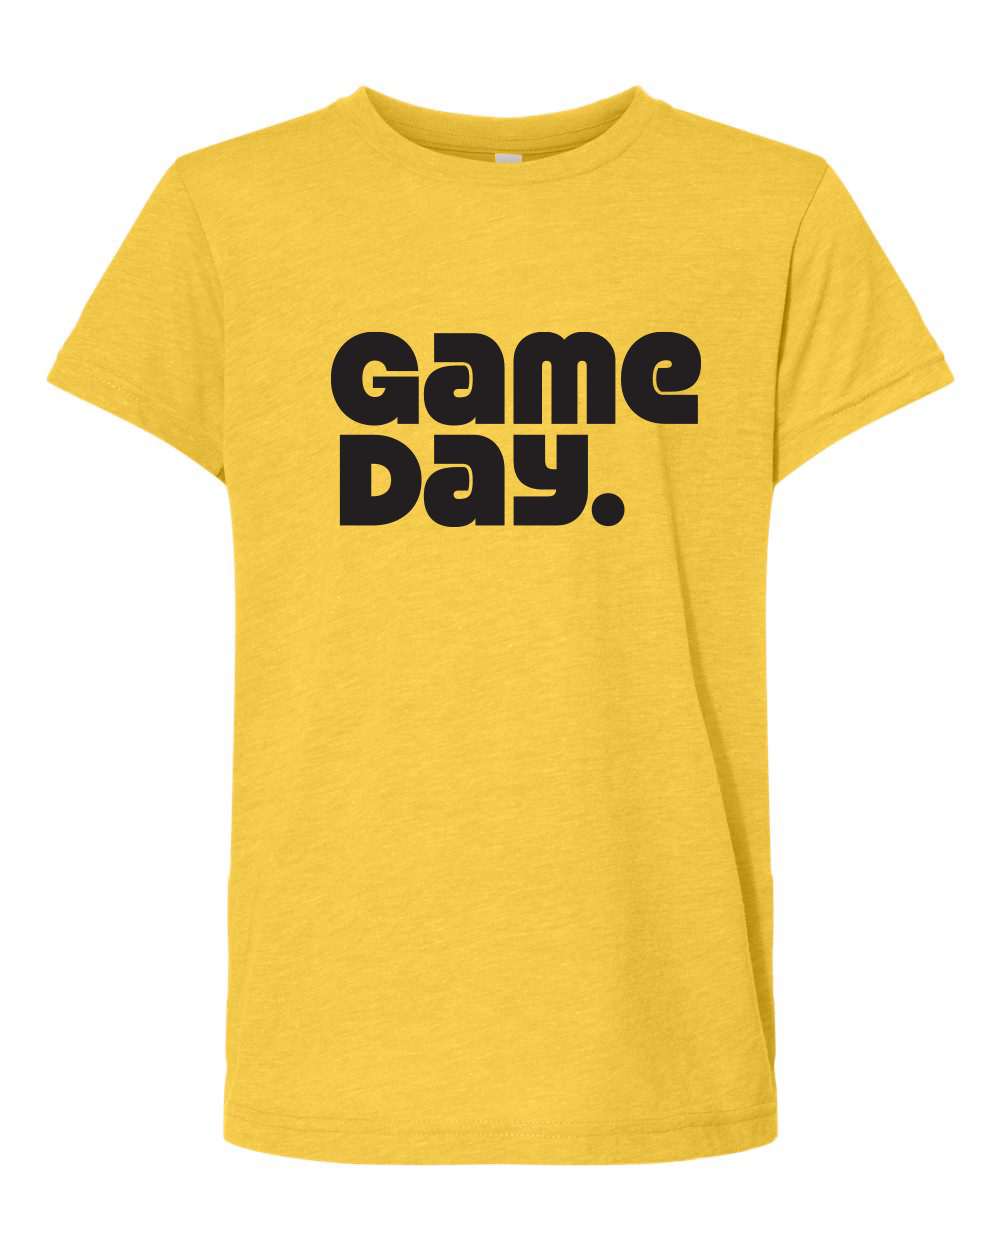 Graphic Tee - Game Day Gold/Black